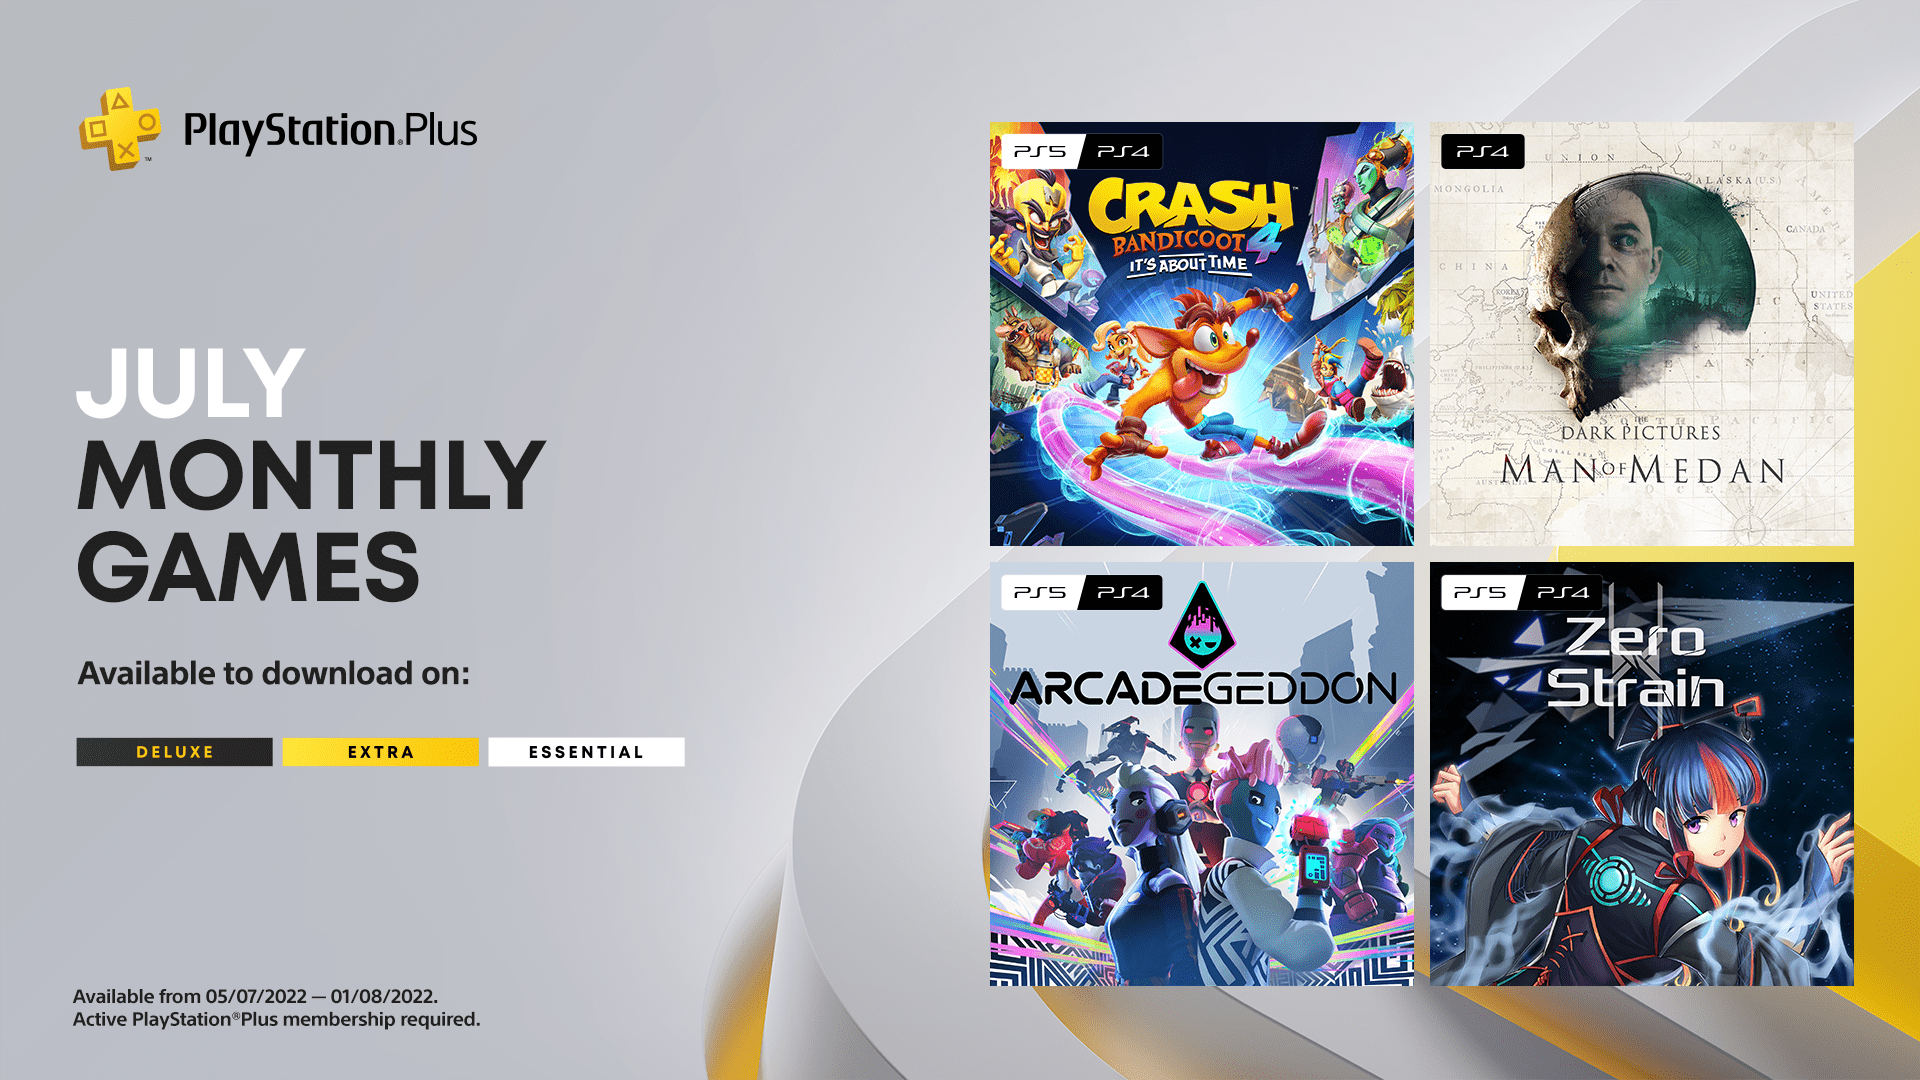 For Southeast Asia) Get ready, PlayStation Plus Season of Play